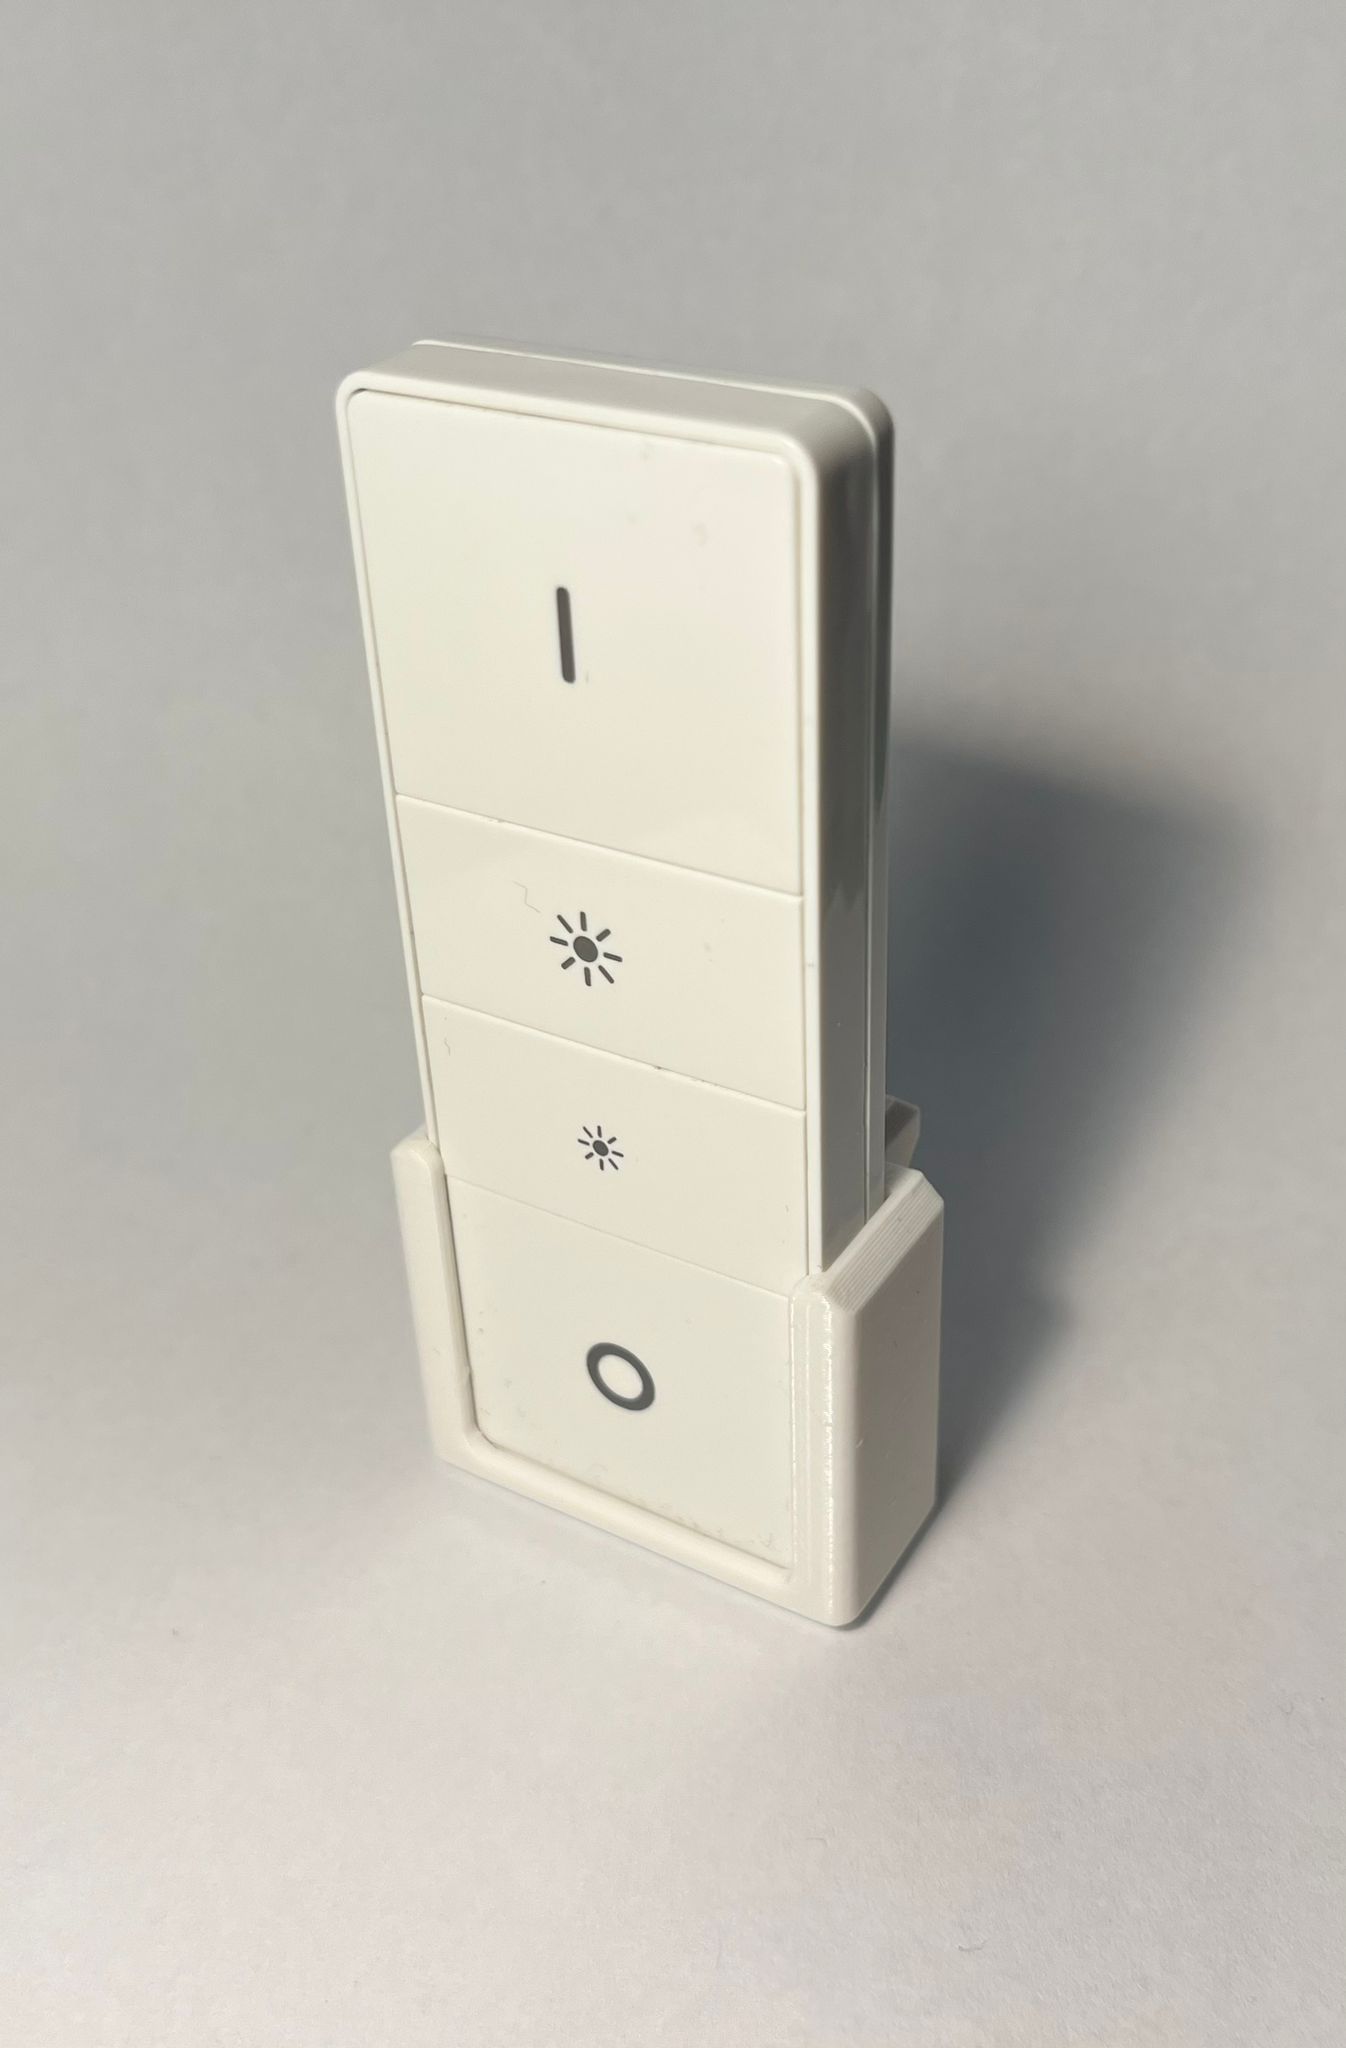 Philips Hue Remote Control Holder by gravity | Download free STL model ...